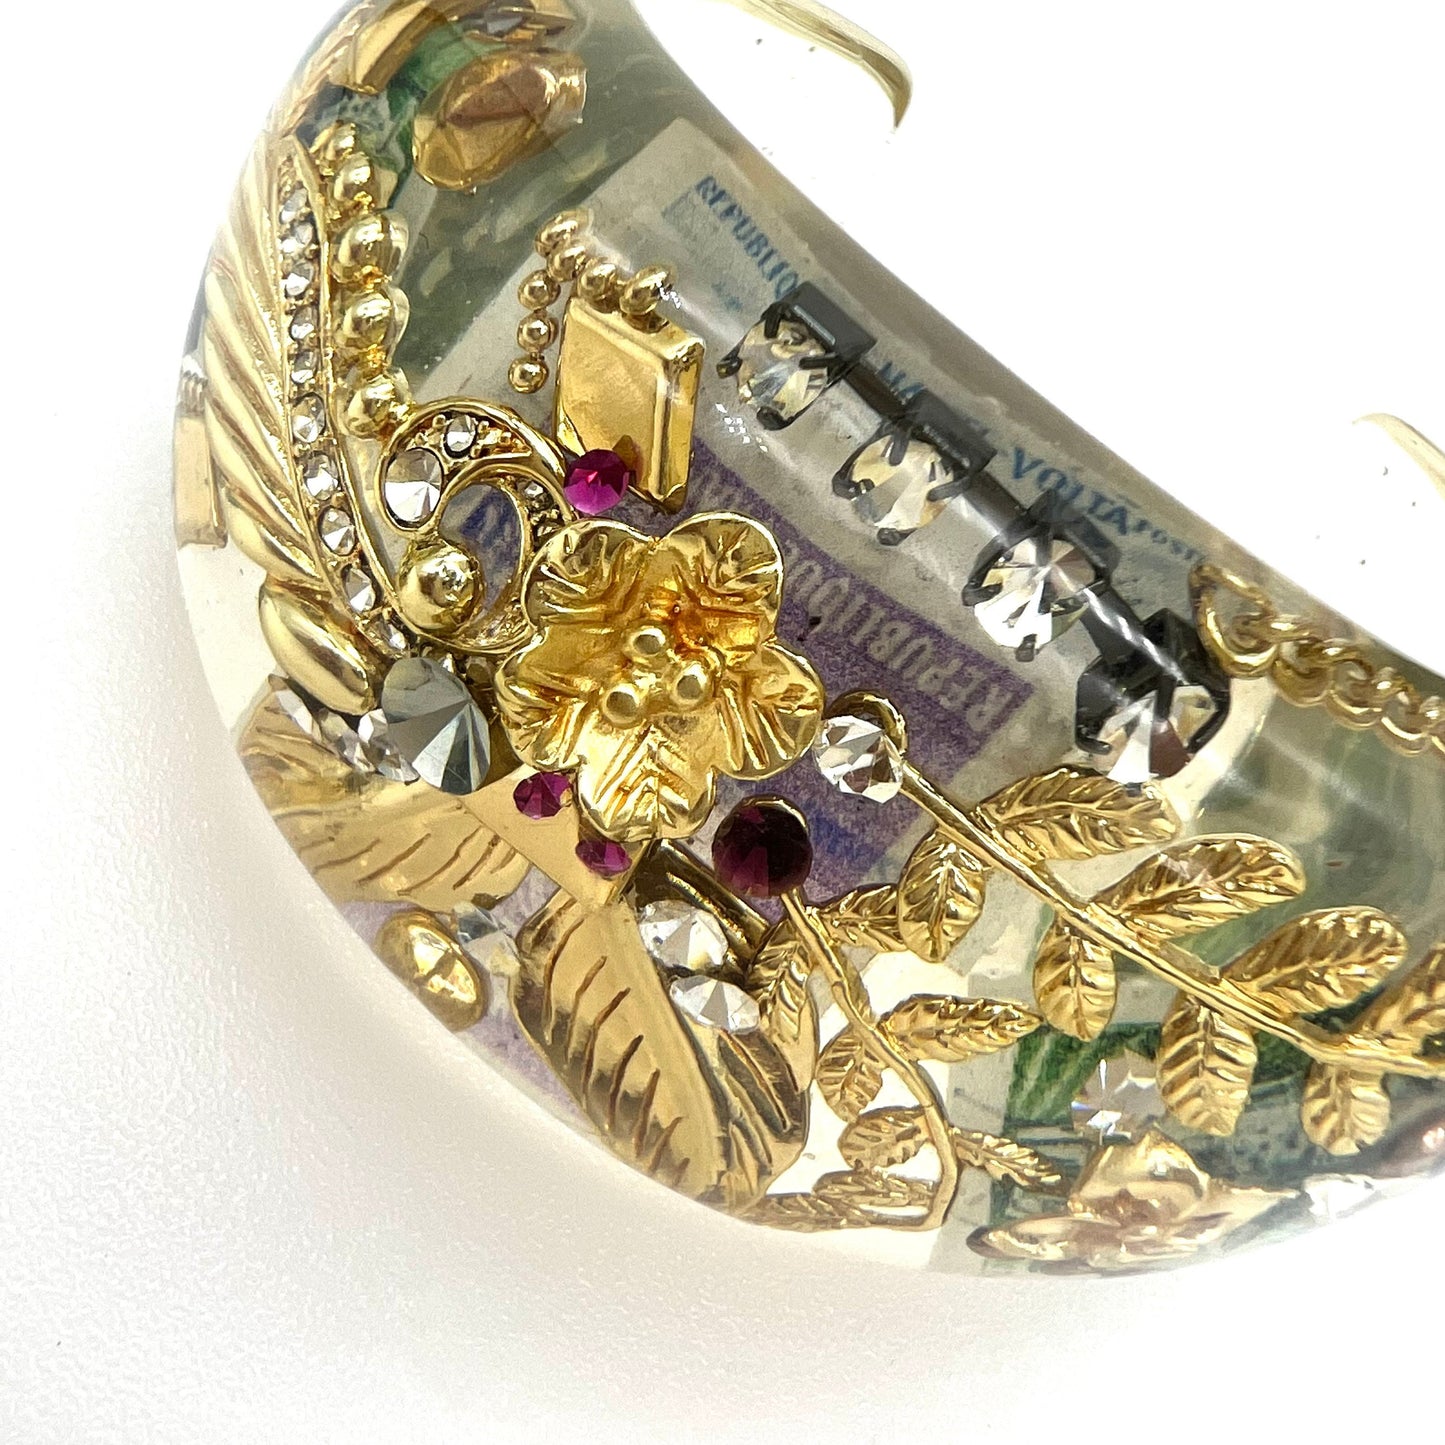 French Resin Cuff with Suspended Elements